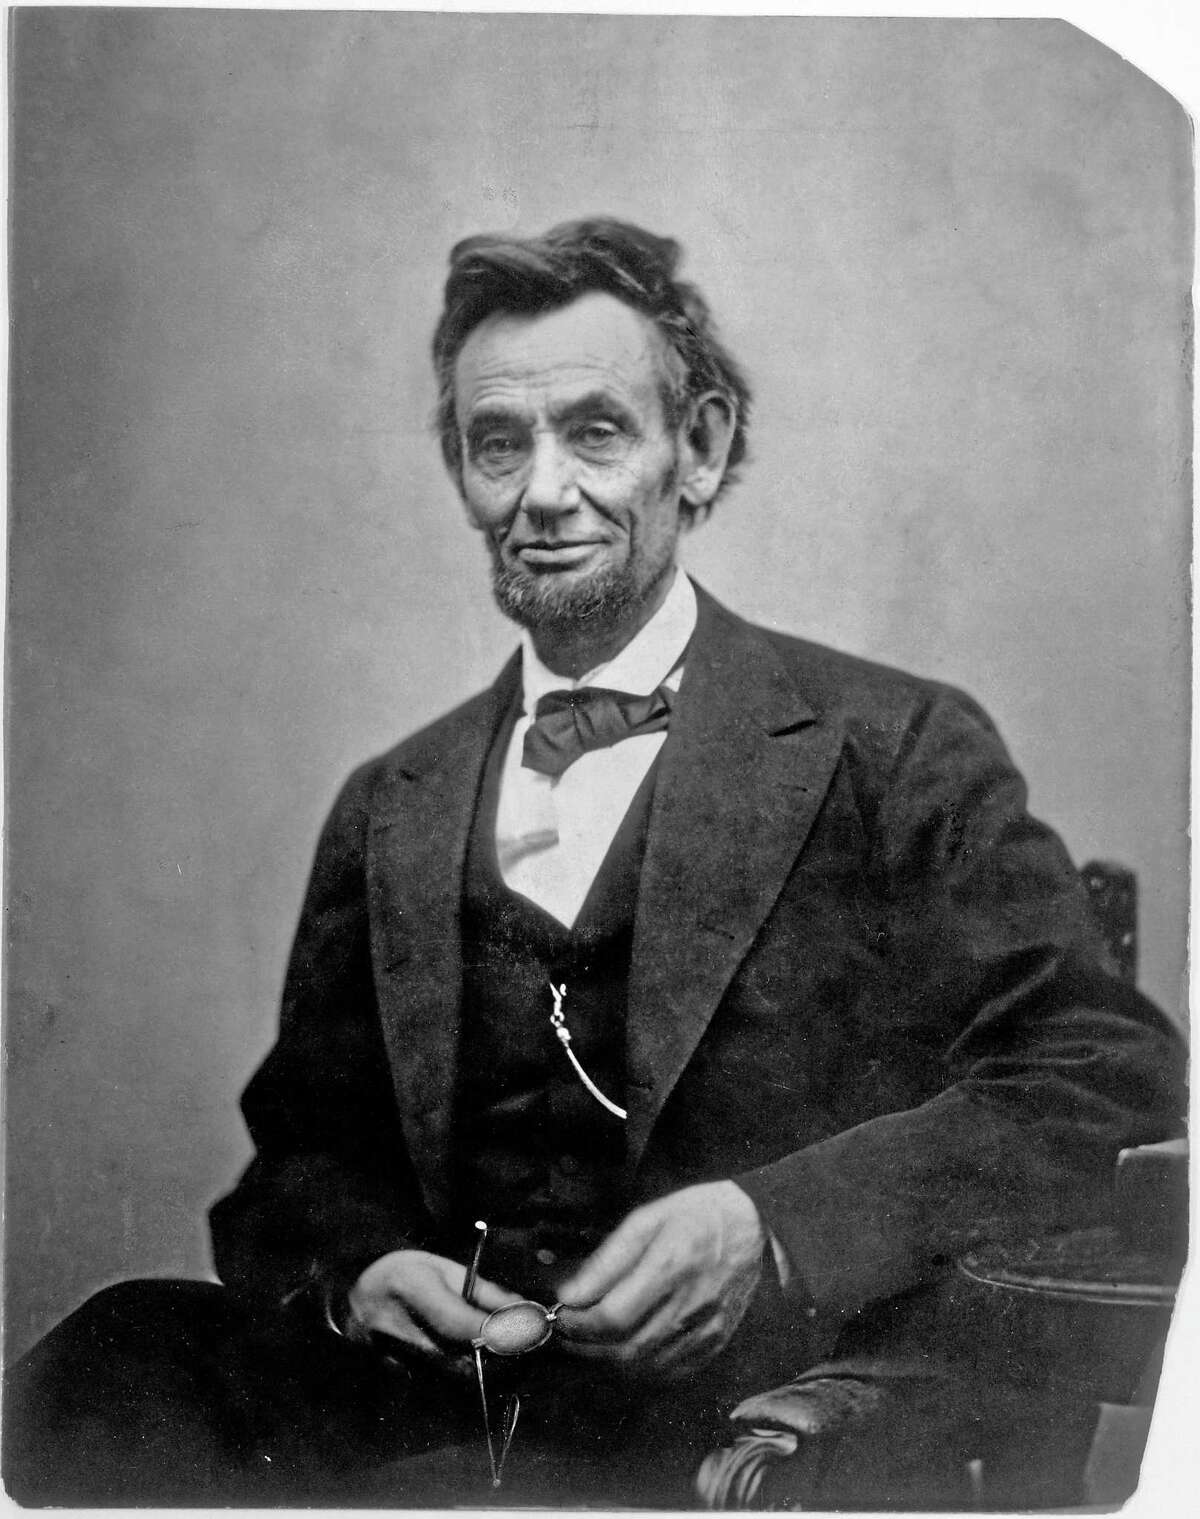 This photograph of Lincoln by Alexander Gardner was taken on Feb. 5, 1865. The president’s haggard, careworn appearance shows the toll wrought by four years of war.